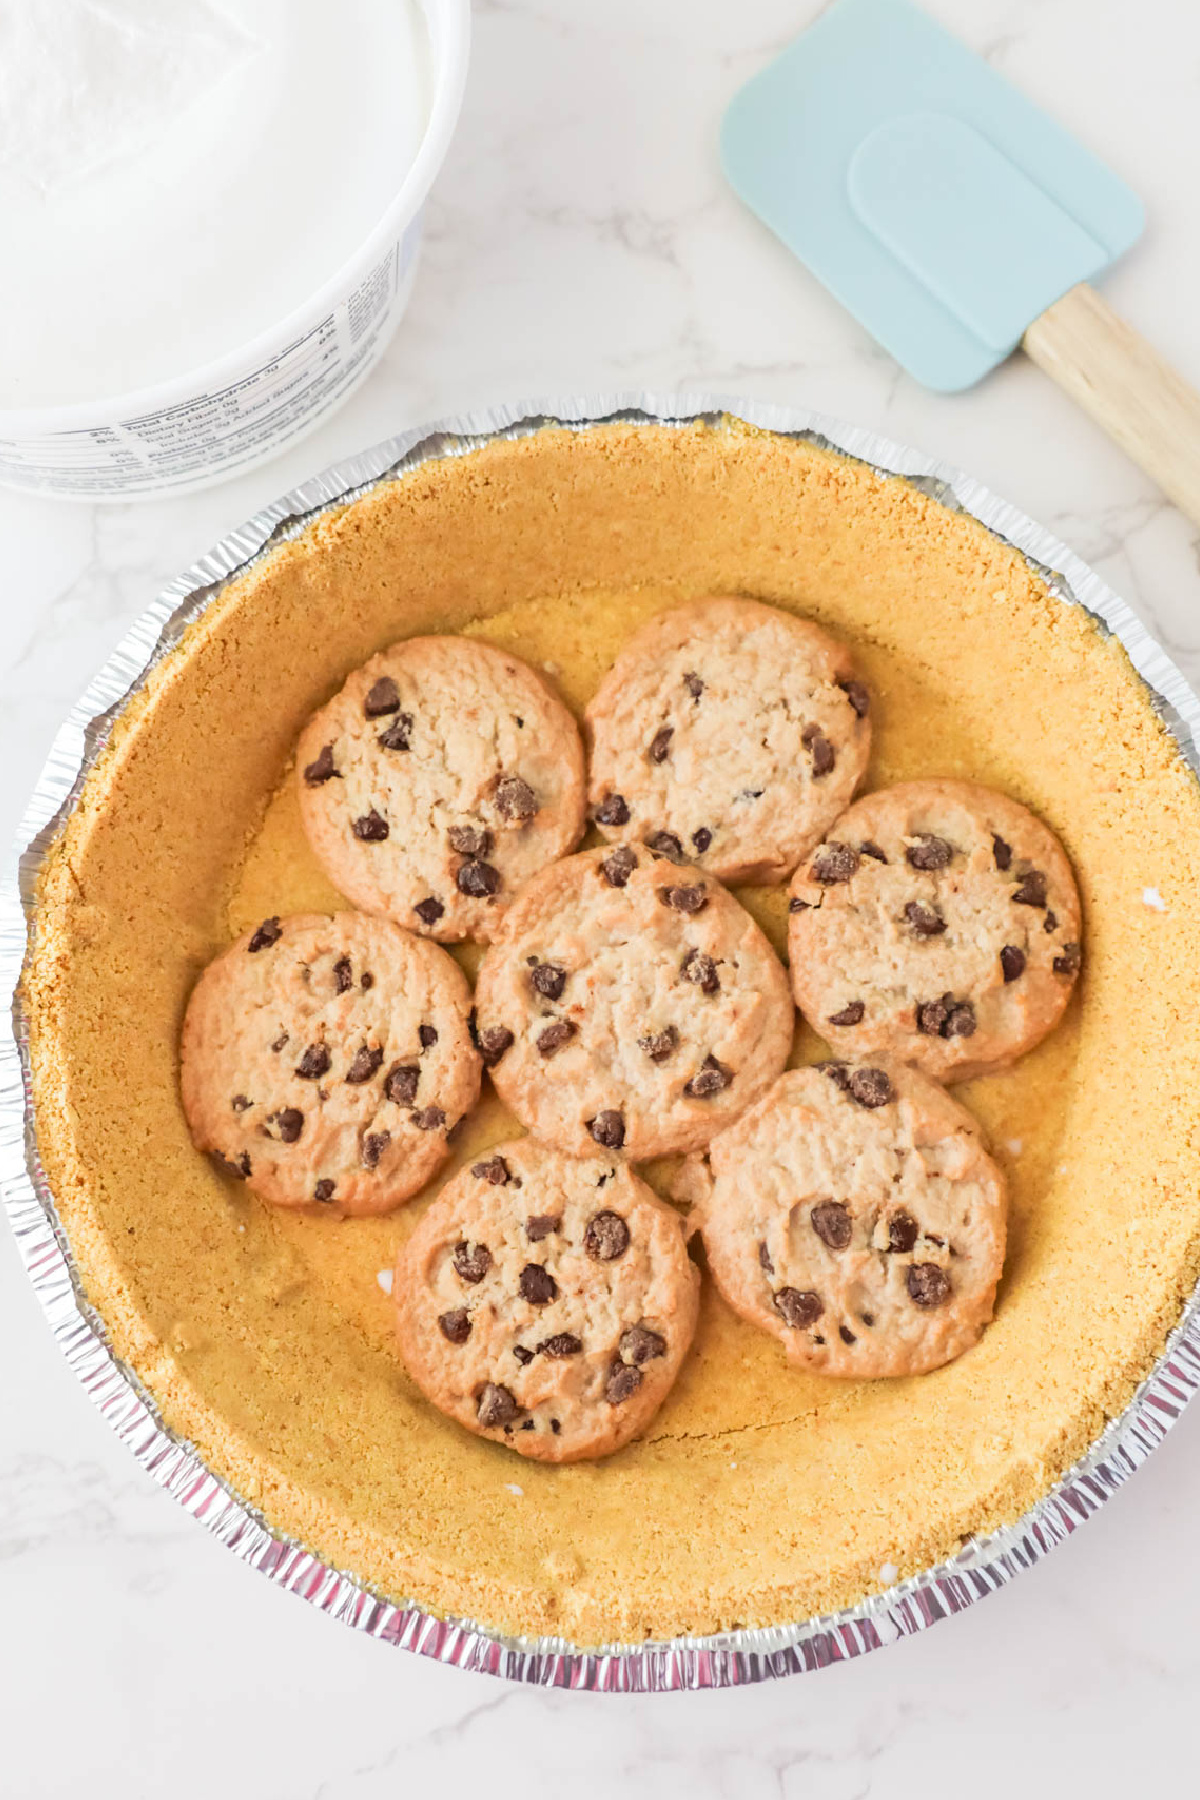 Chocolate chip cookies arranged on a pie crust